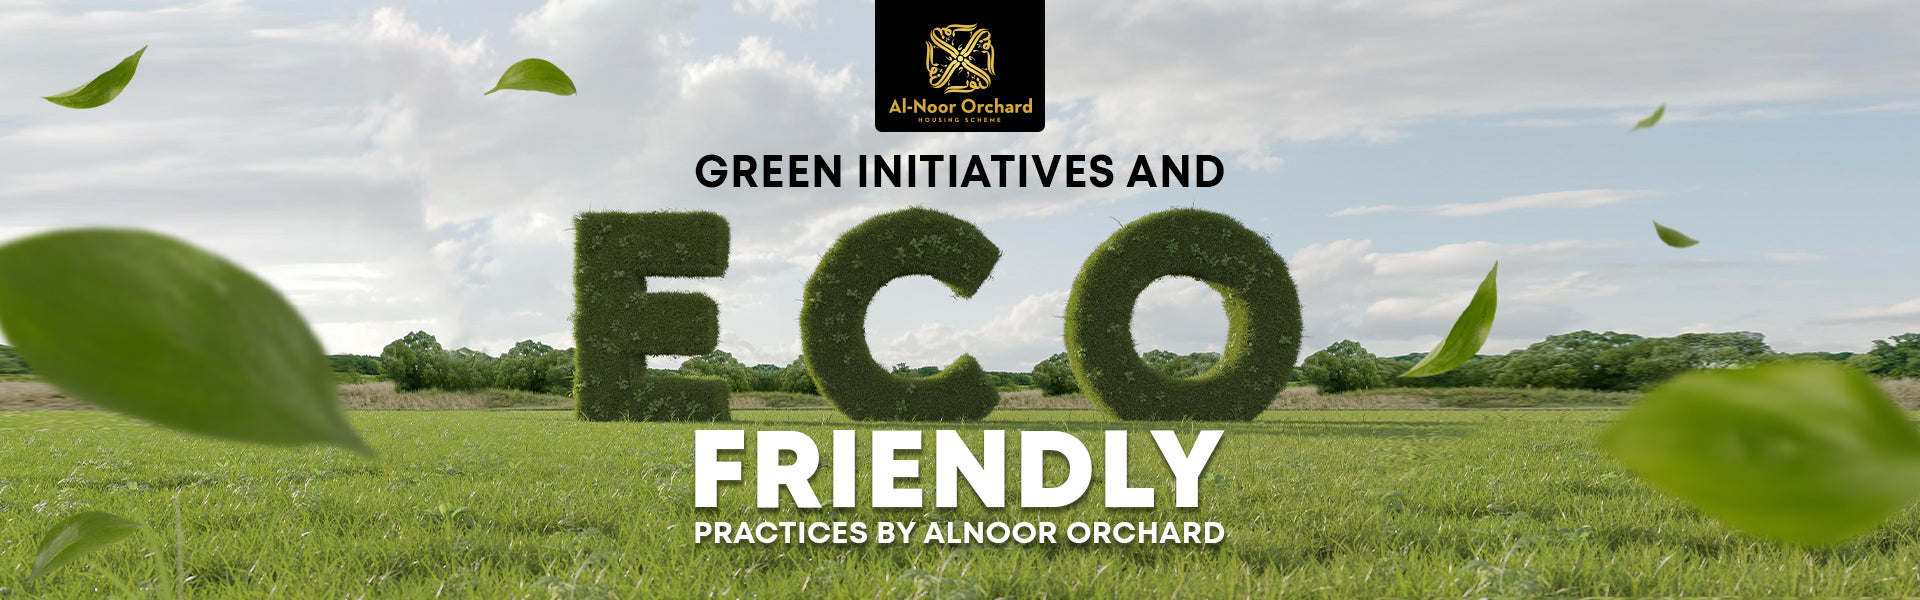 Environmentally Friendly Initiatives and Green Practices at Al-Noor Orchard